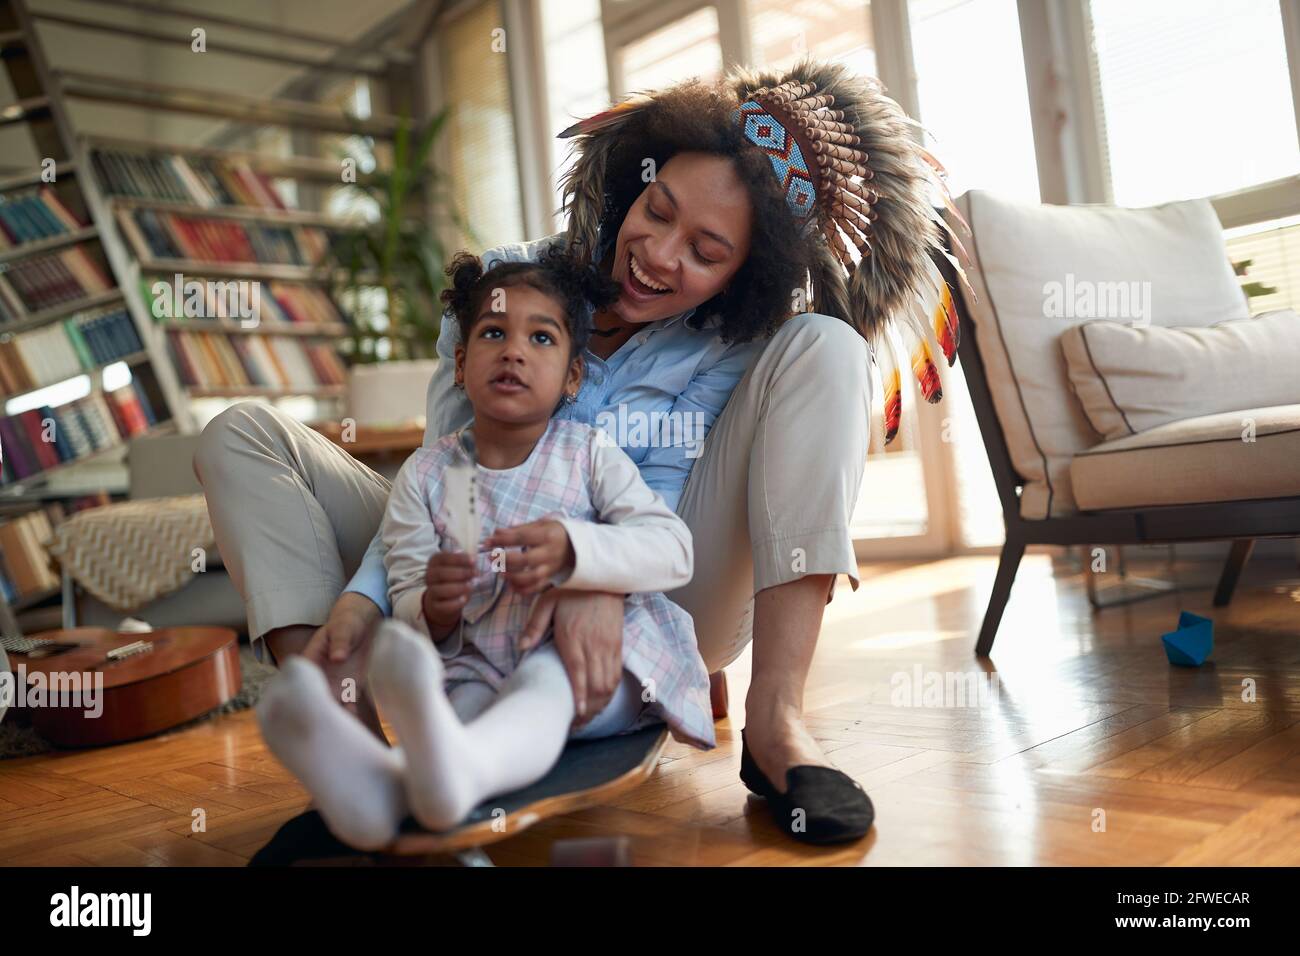 A young Mom with an indian headdress rides on the skateboard with her little daughter in a cheerful atmosphere at home. Family, together, love, playti Stock Photo